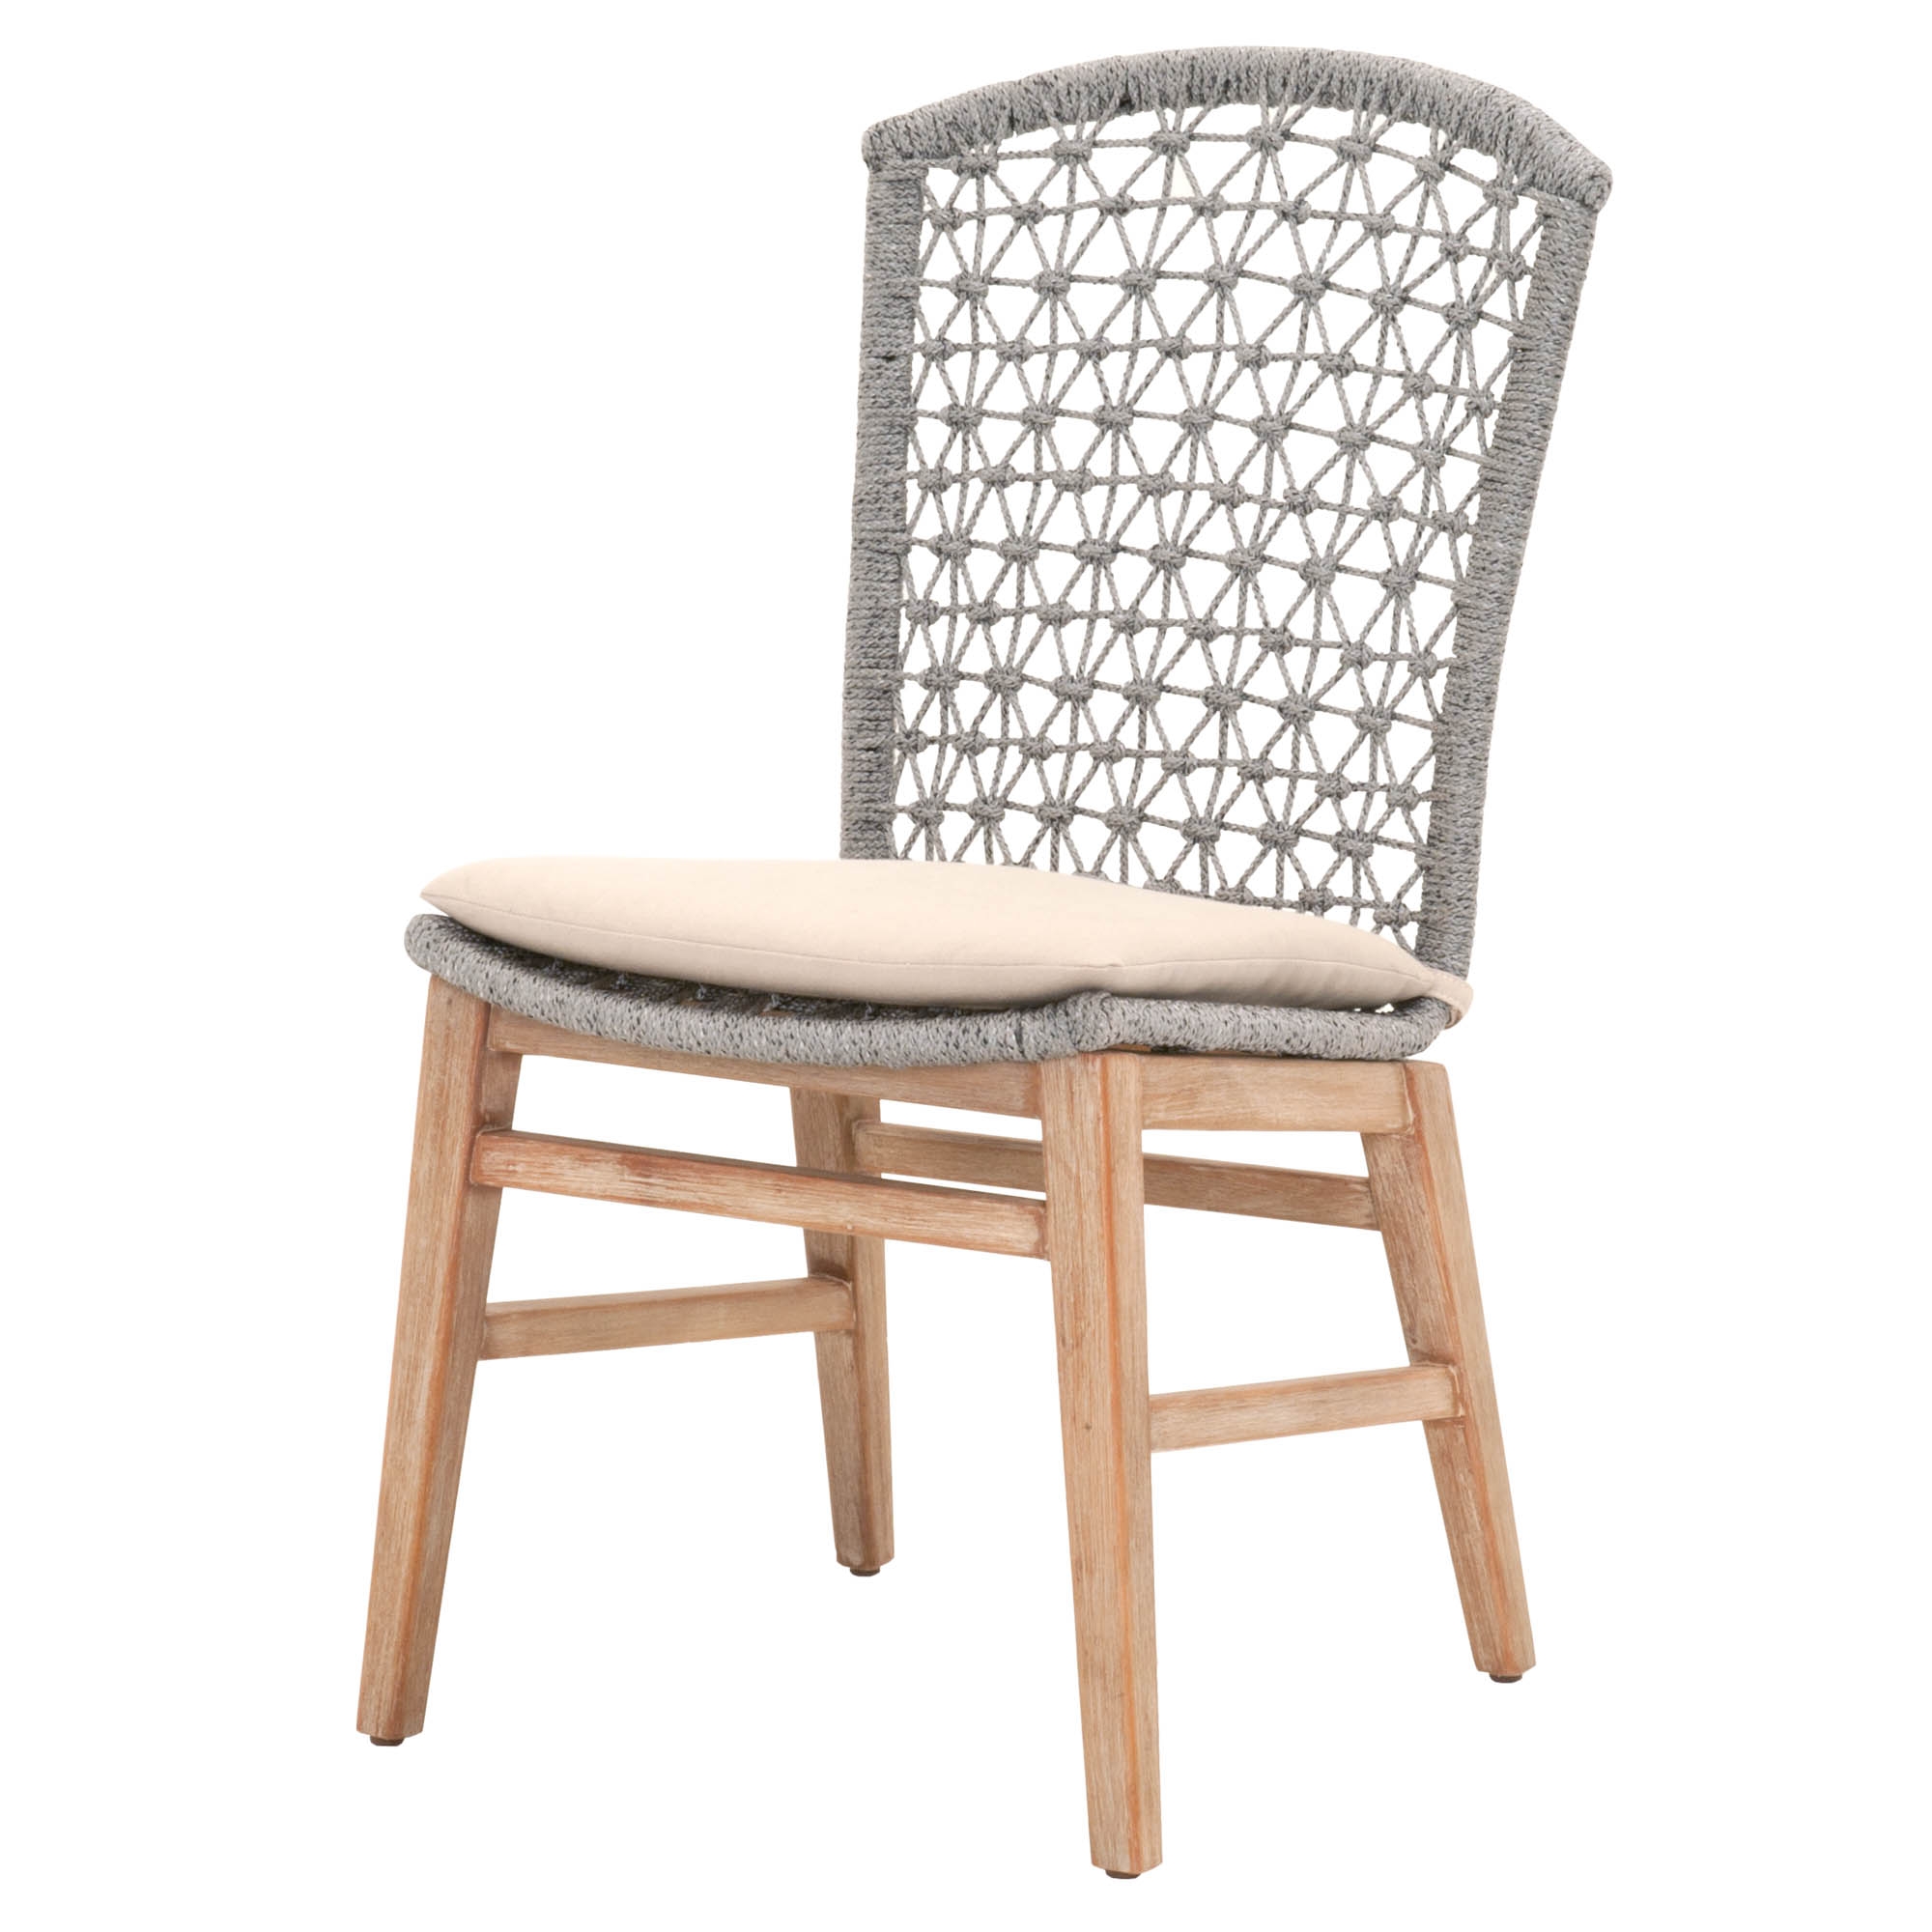 Lace Dining Chair, Set of 2 - Image 1